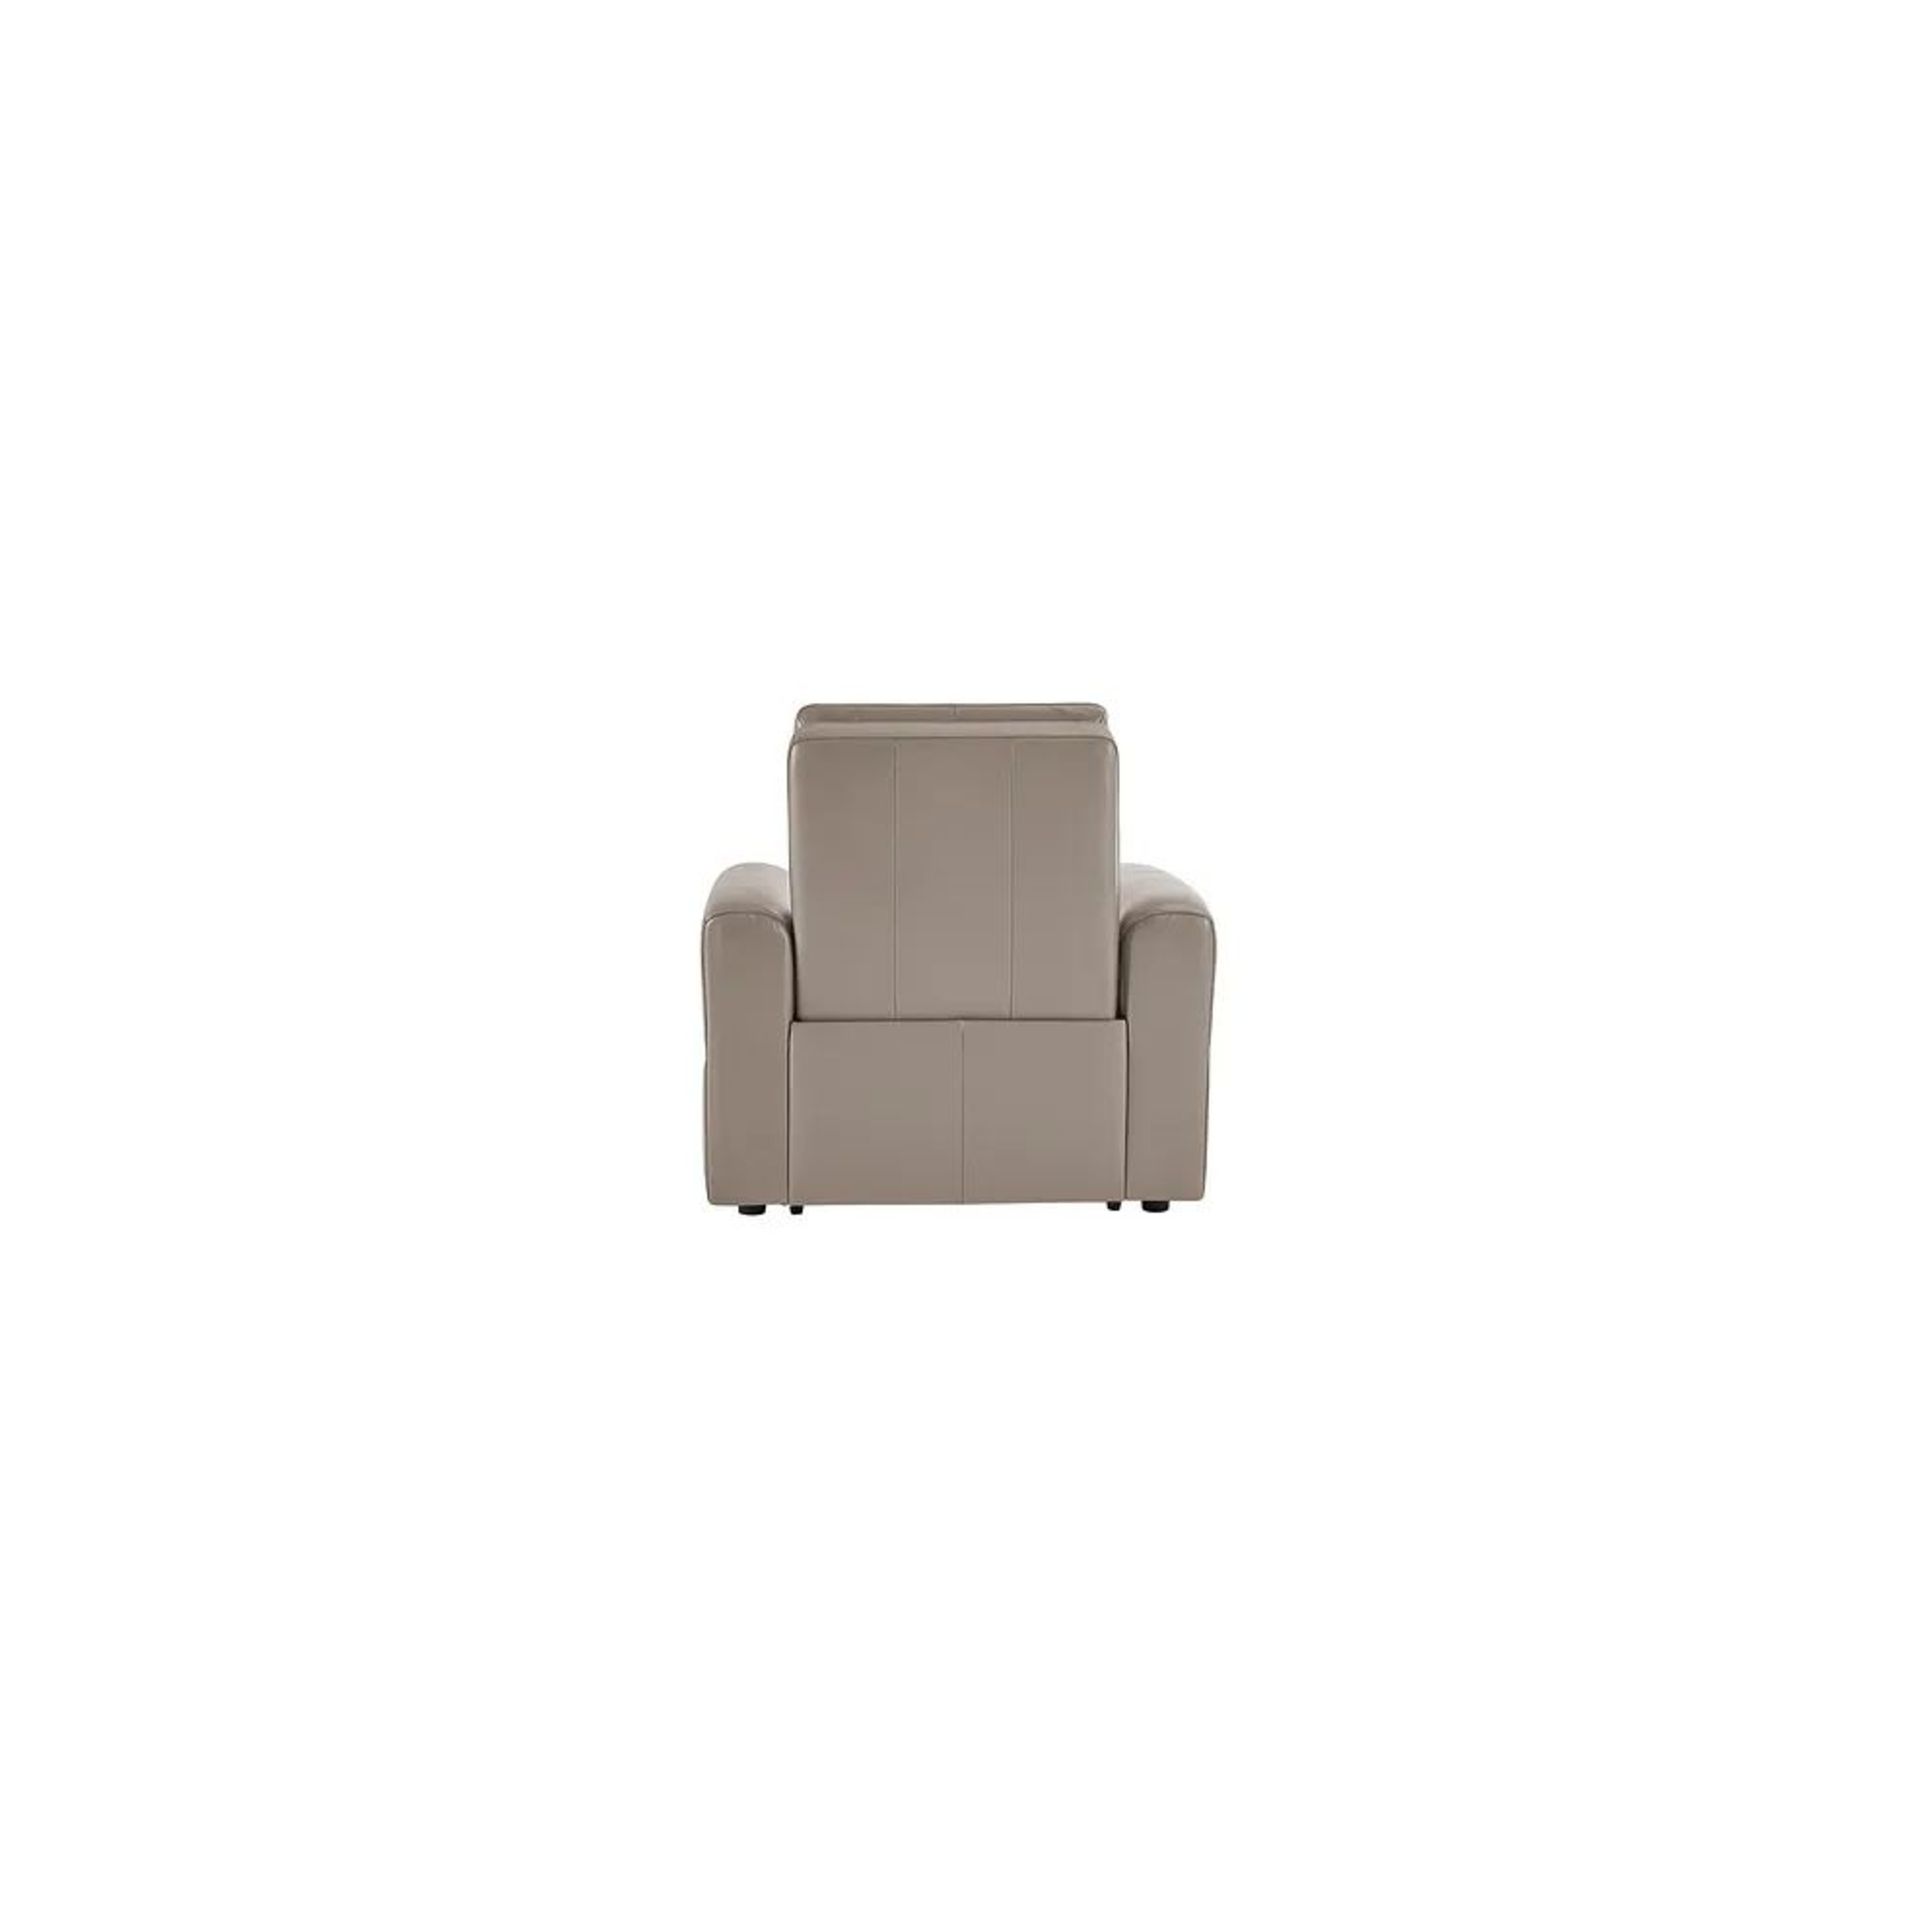 BRAND NEW SAMSON Electric Recliner Armchair - STONE LEATHER. RRP £1249. Showcasing neat, modern - Image 5 of 10